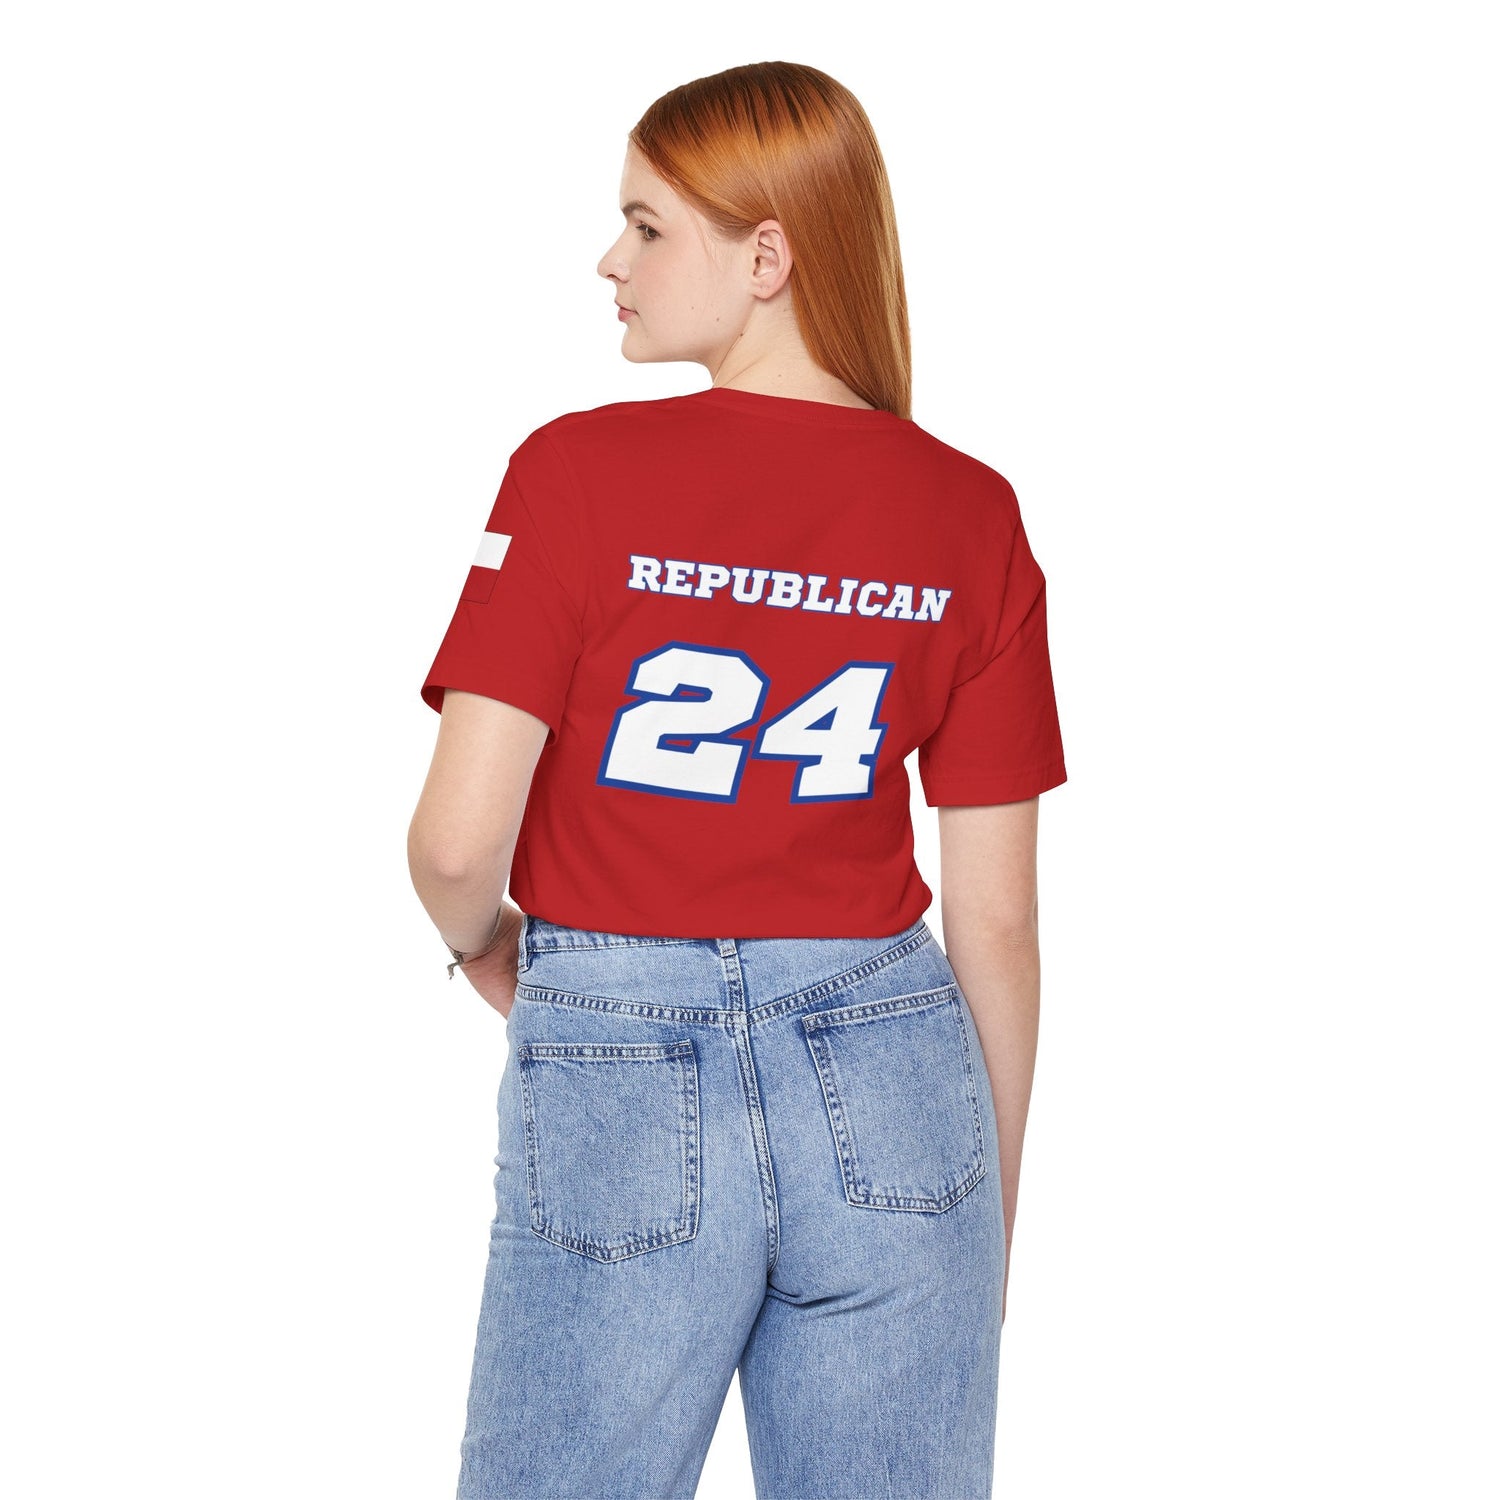 Williamson County Republican Party 24 Tee - Whiskey Cotton LLC